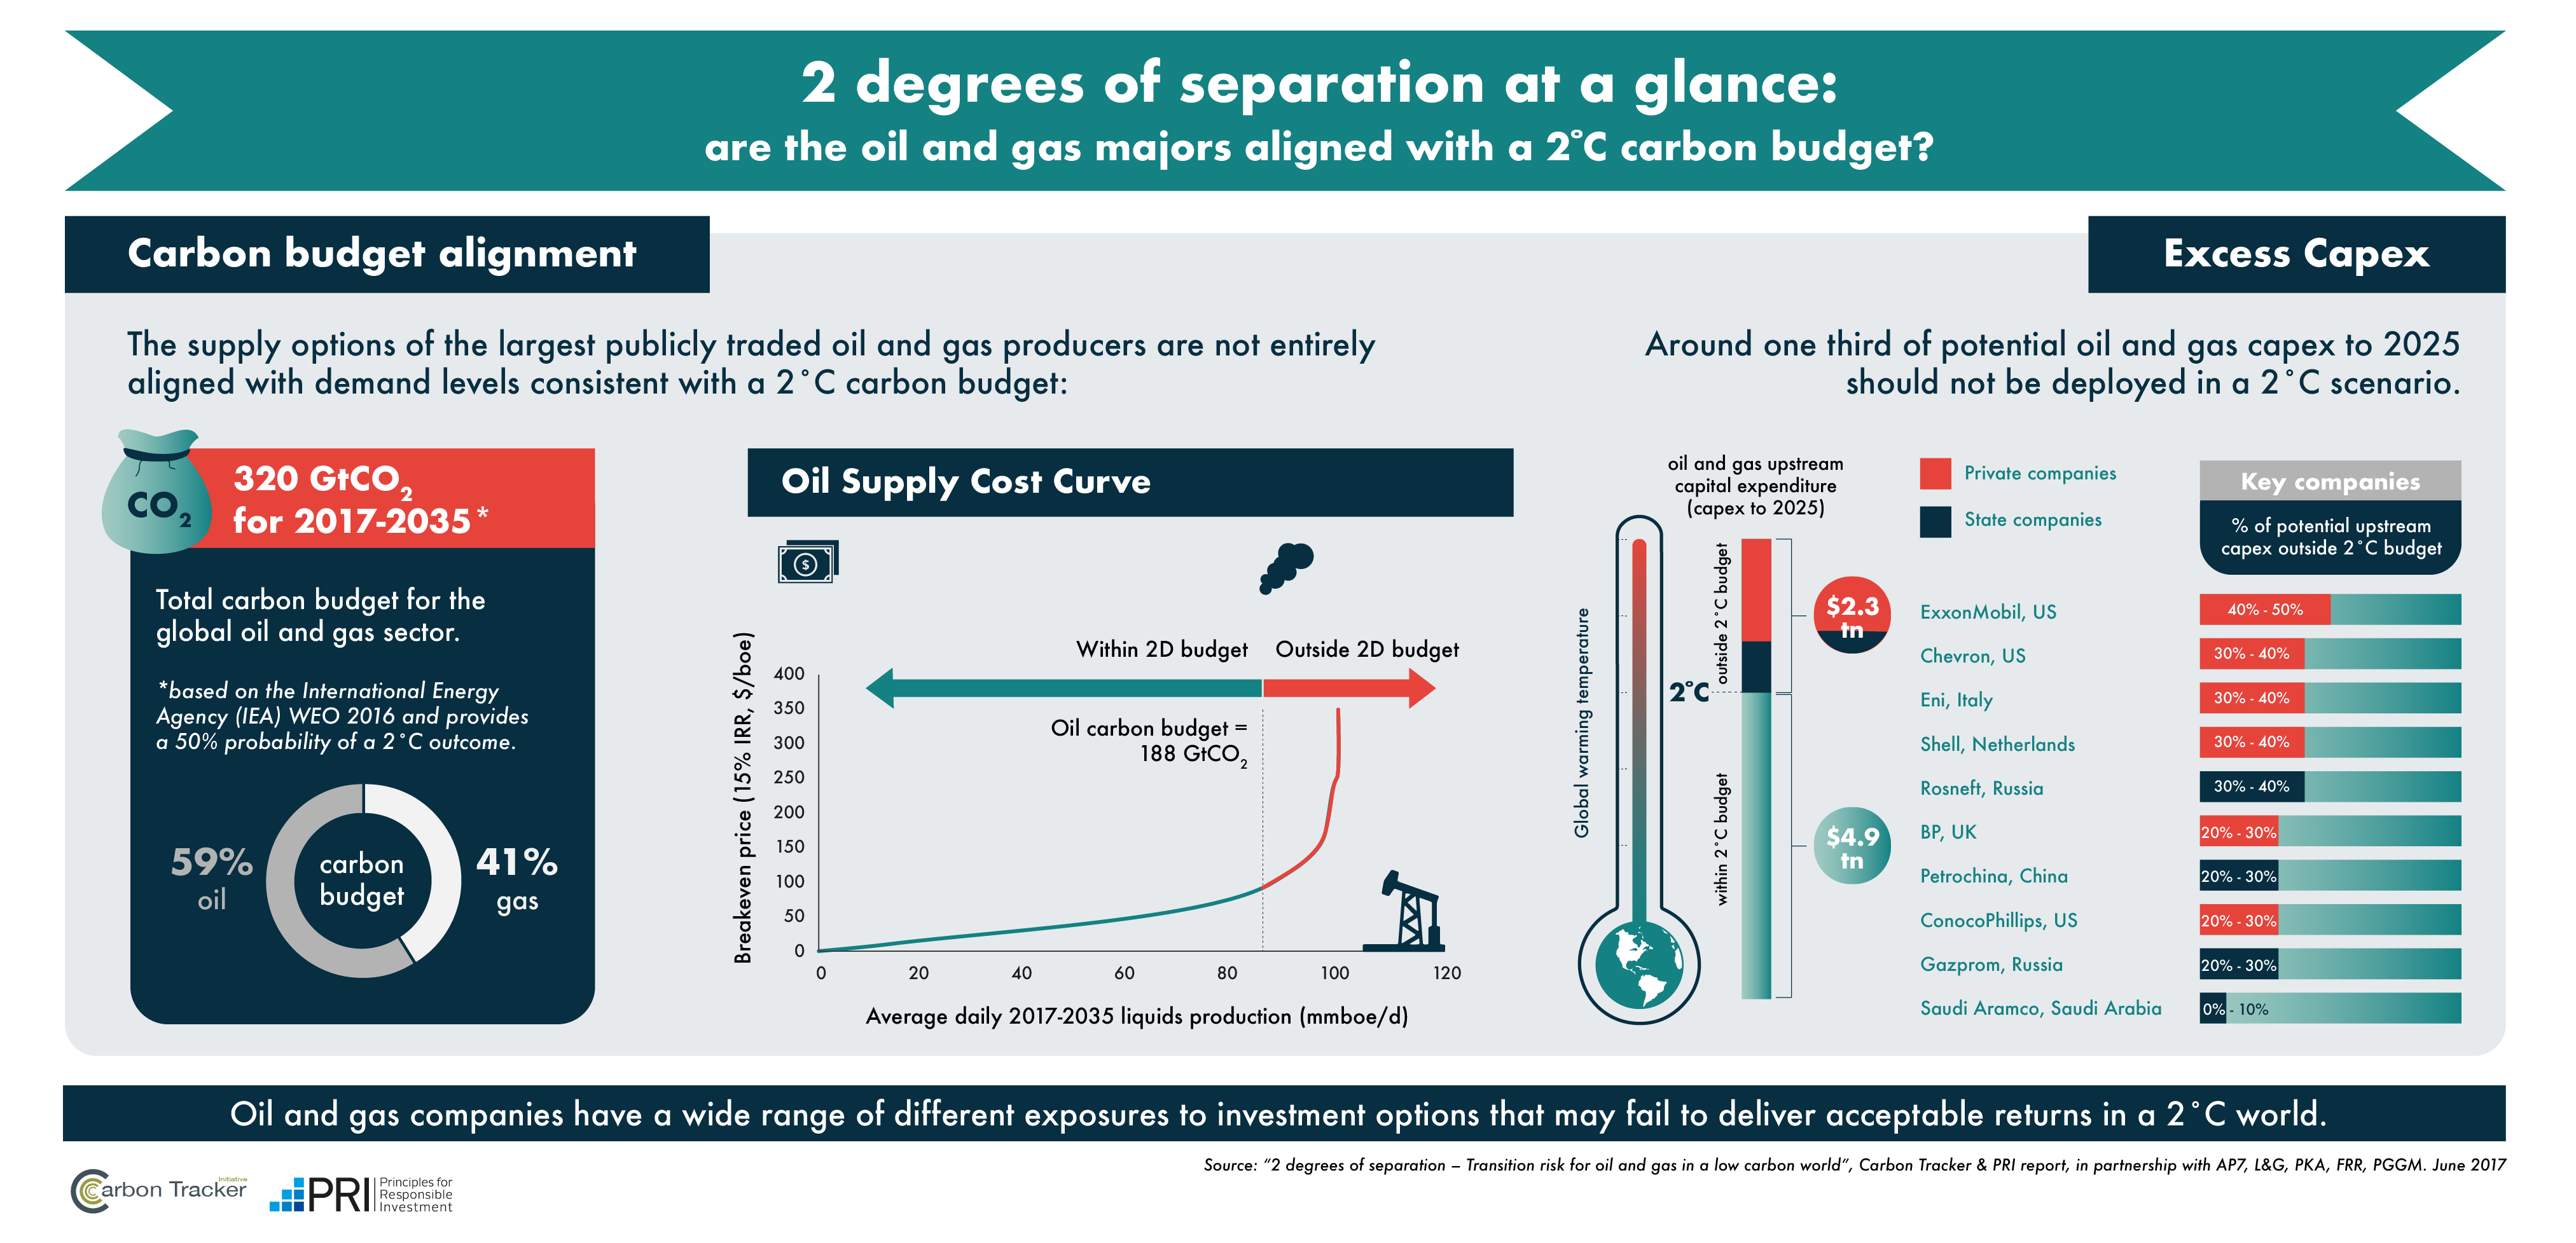 2 Degrees of separation at a glance: are the oil and gas majors aligned with a 2 degrees carbon budget?